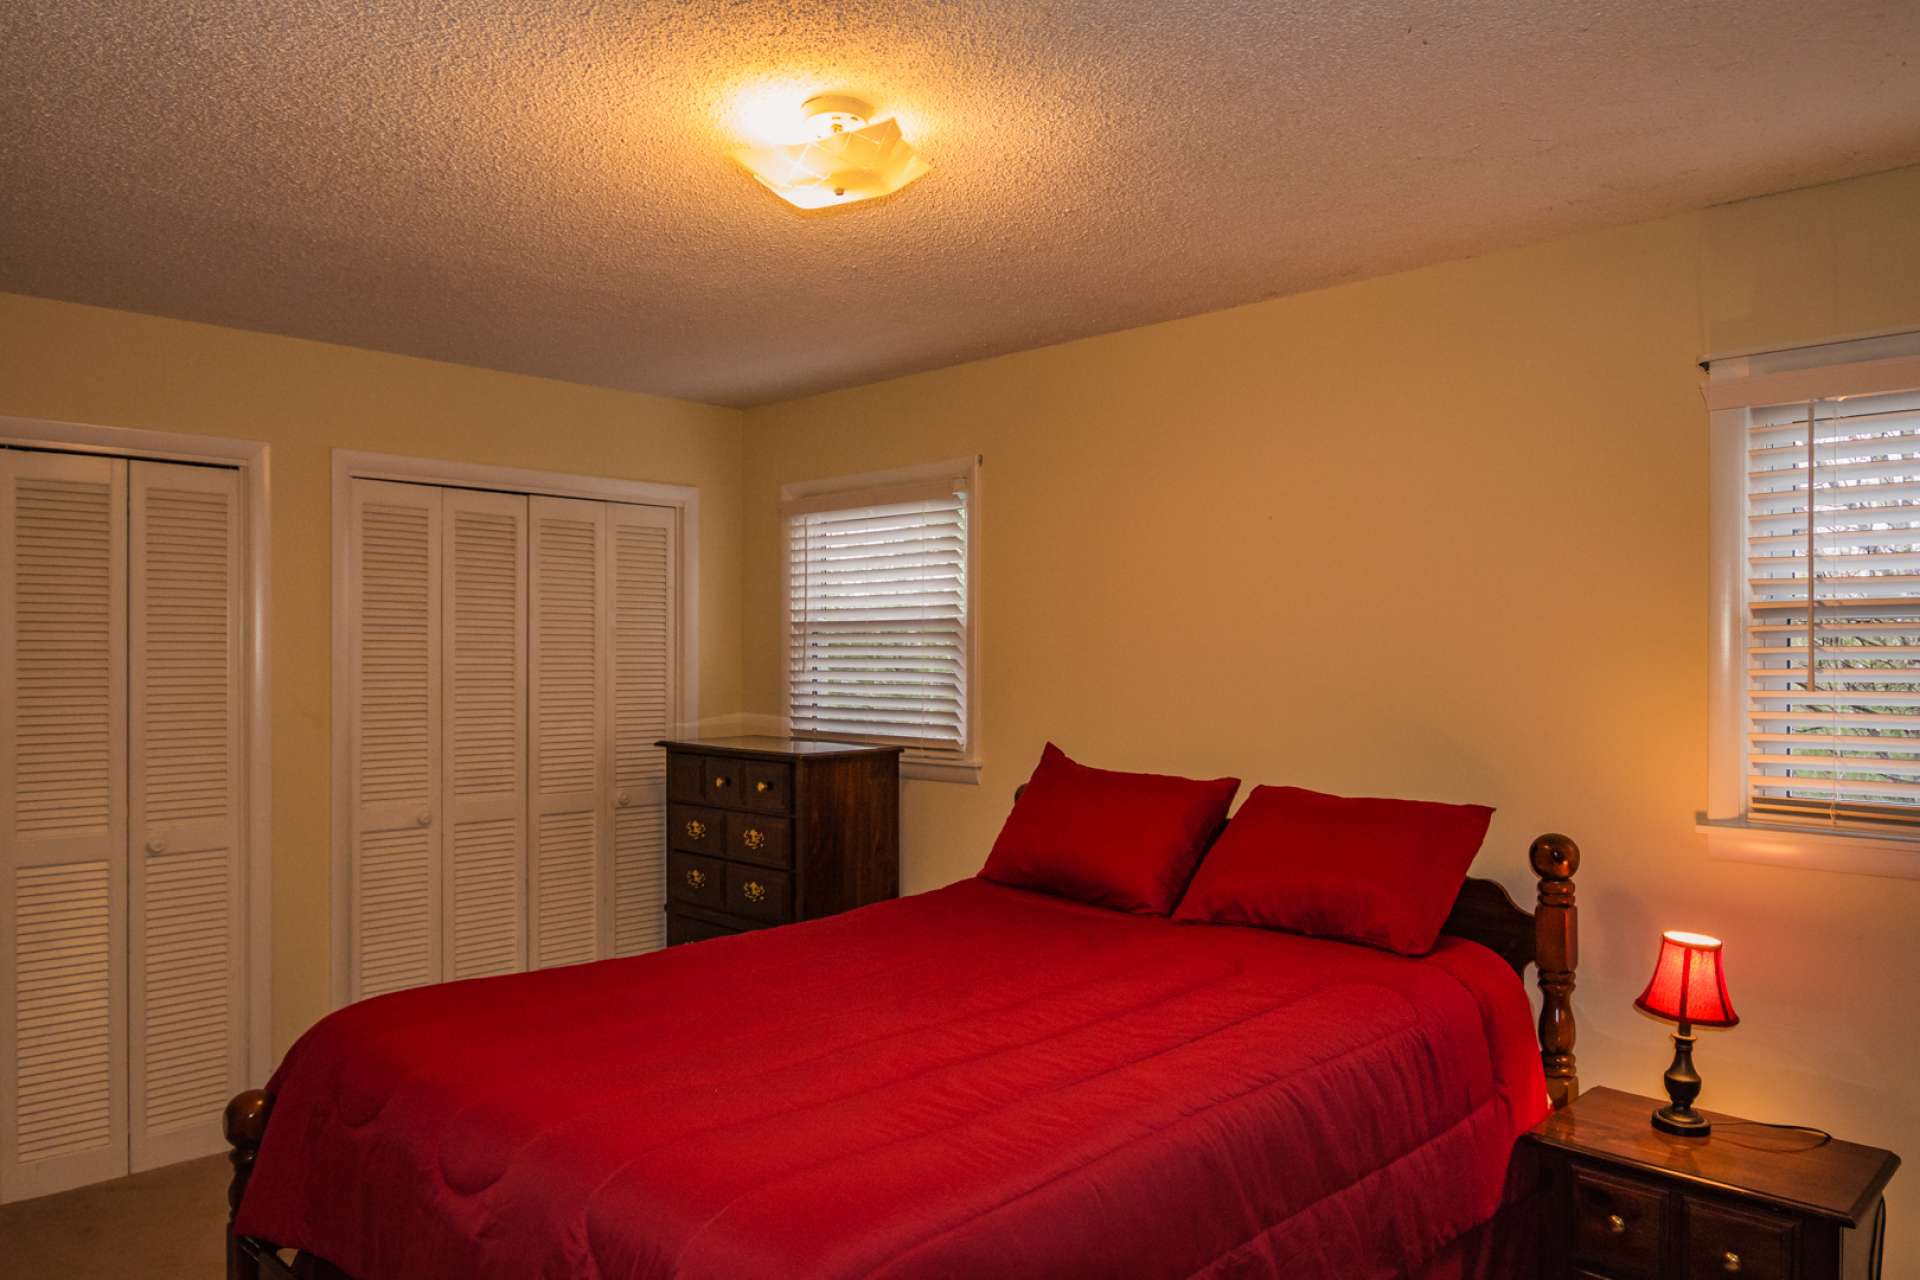 There are two bedrooms on the main level, both are ample sized and share a full bath.